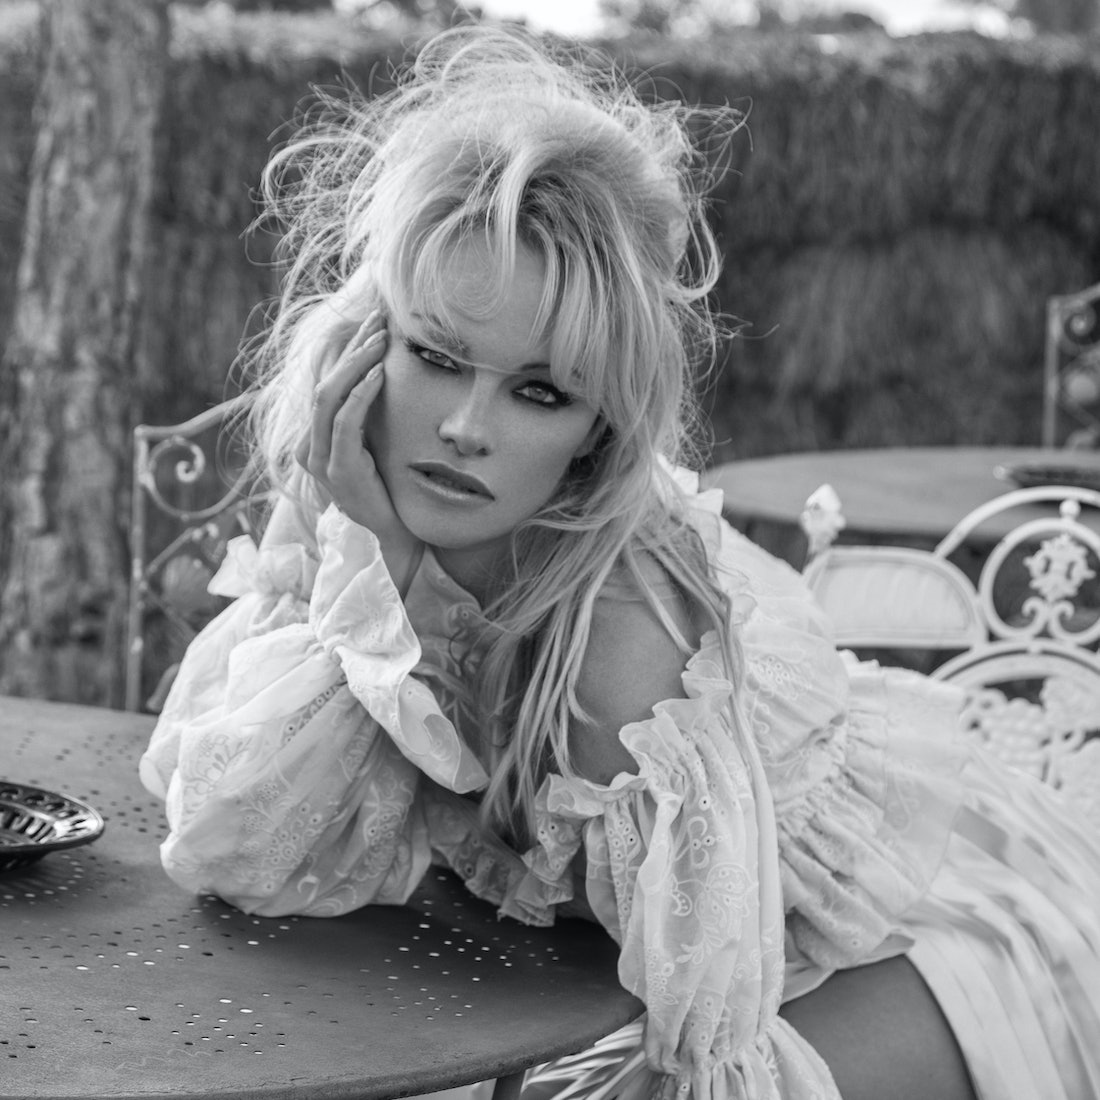 Pamela Anderson wears a white dress and sits at a table.